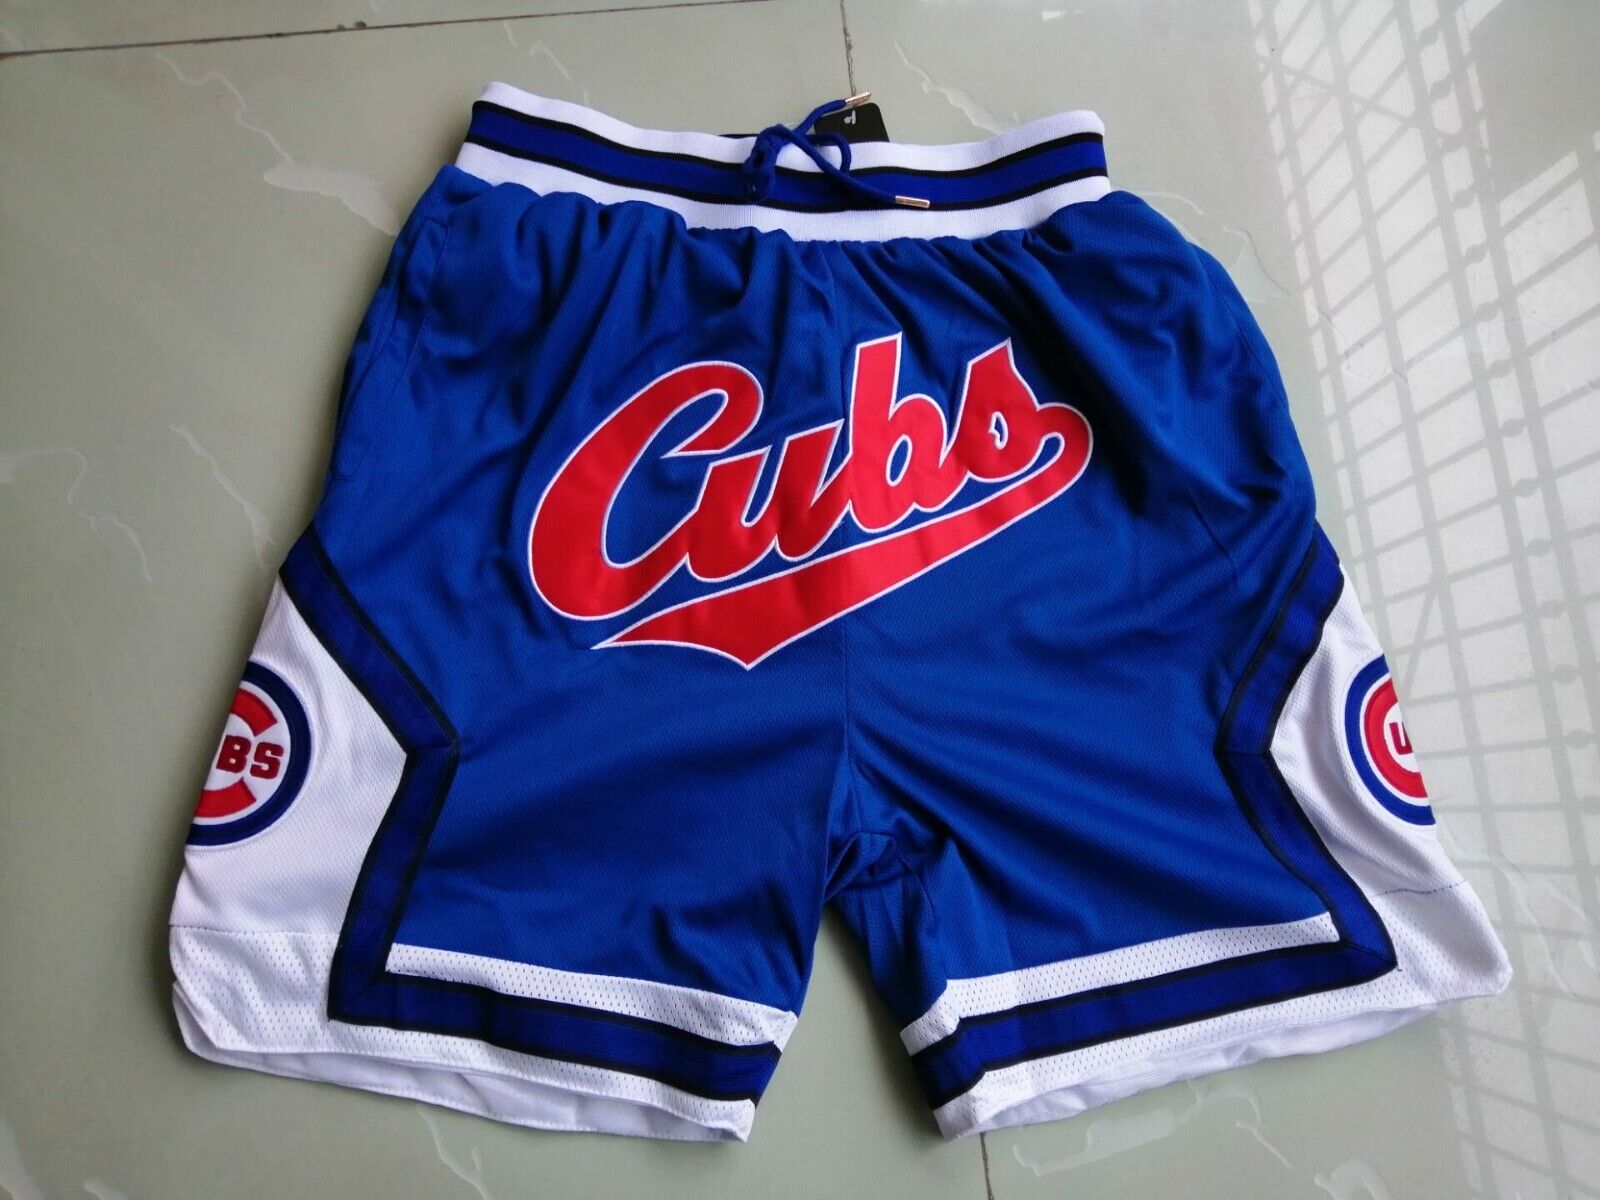 Chicago Cubs Summer City Baseball Retro Blue Shorts New Stitched size S-3XL